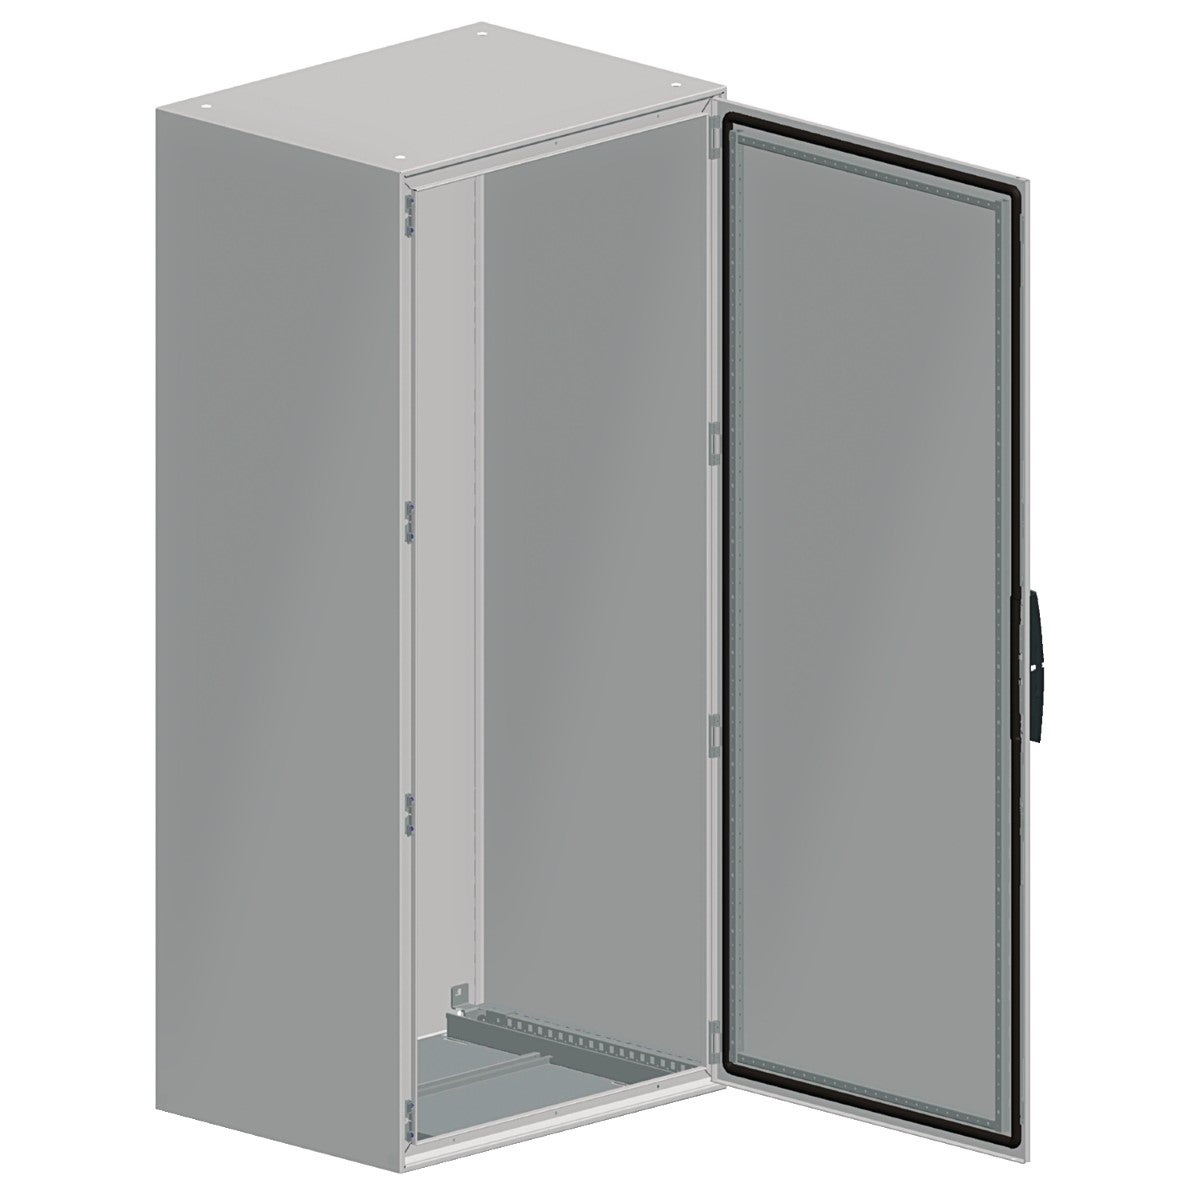 Spacial SM compact enclosure without mounting plate - 2000x800x400 mm